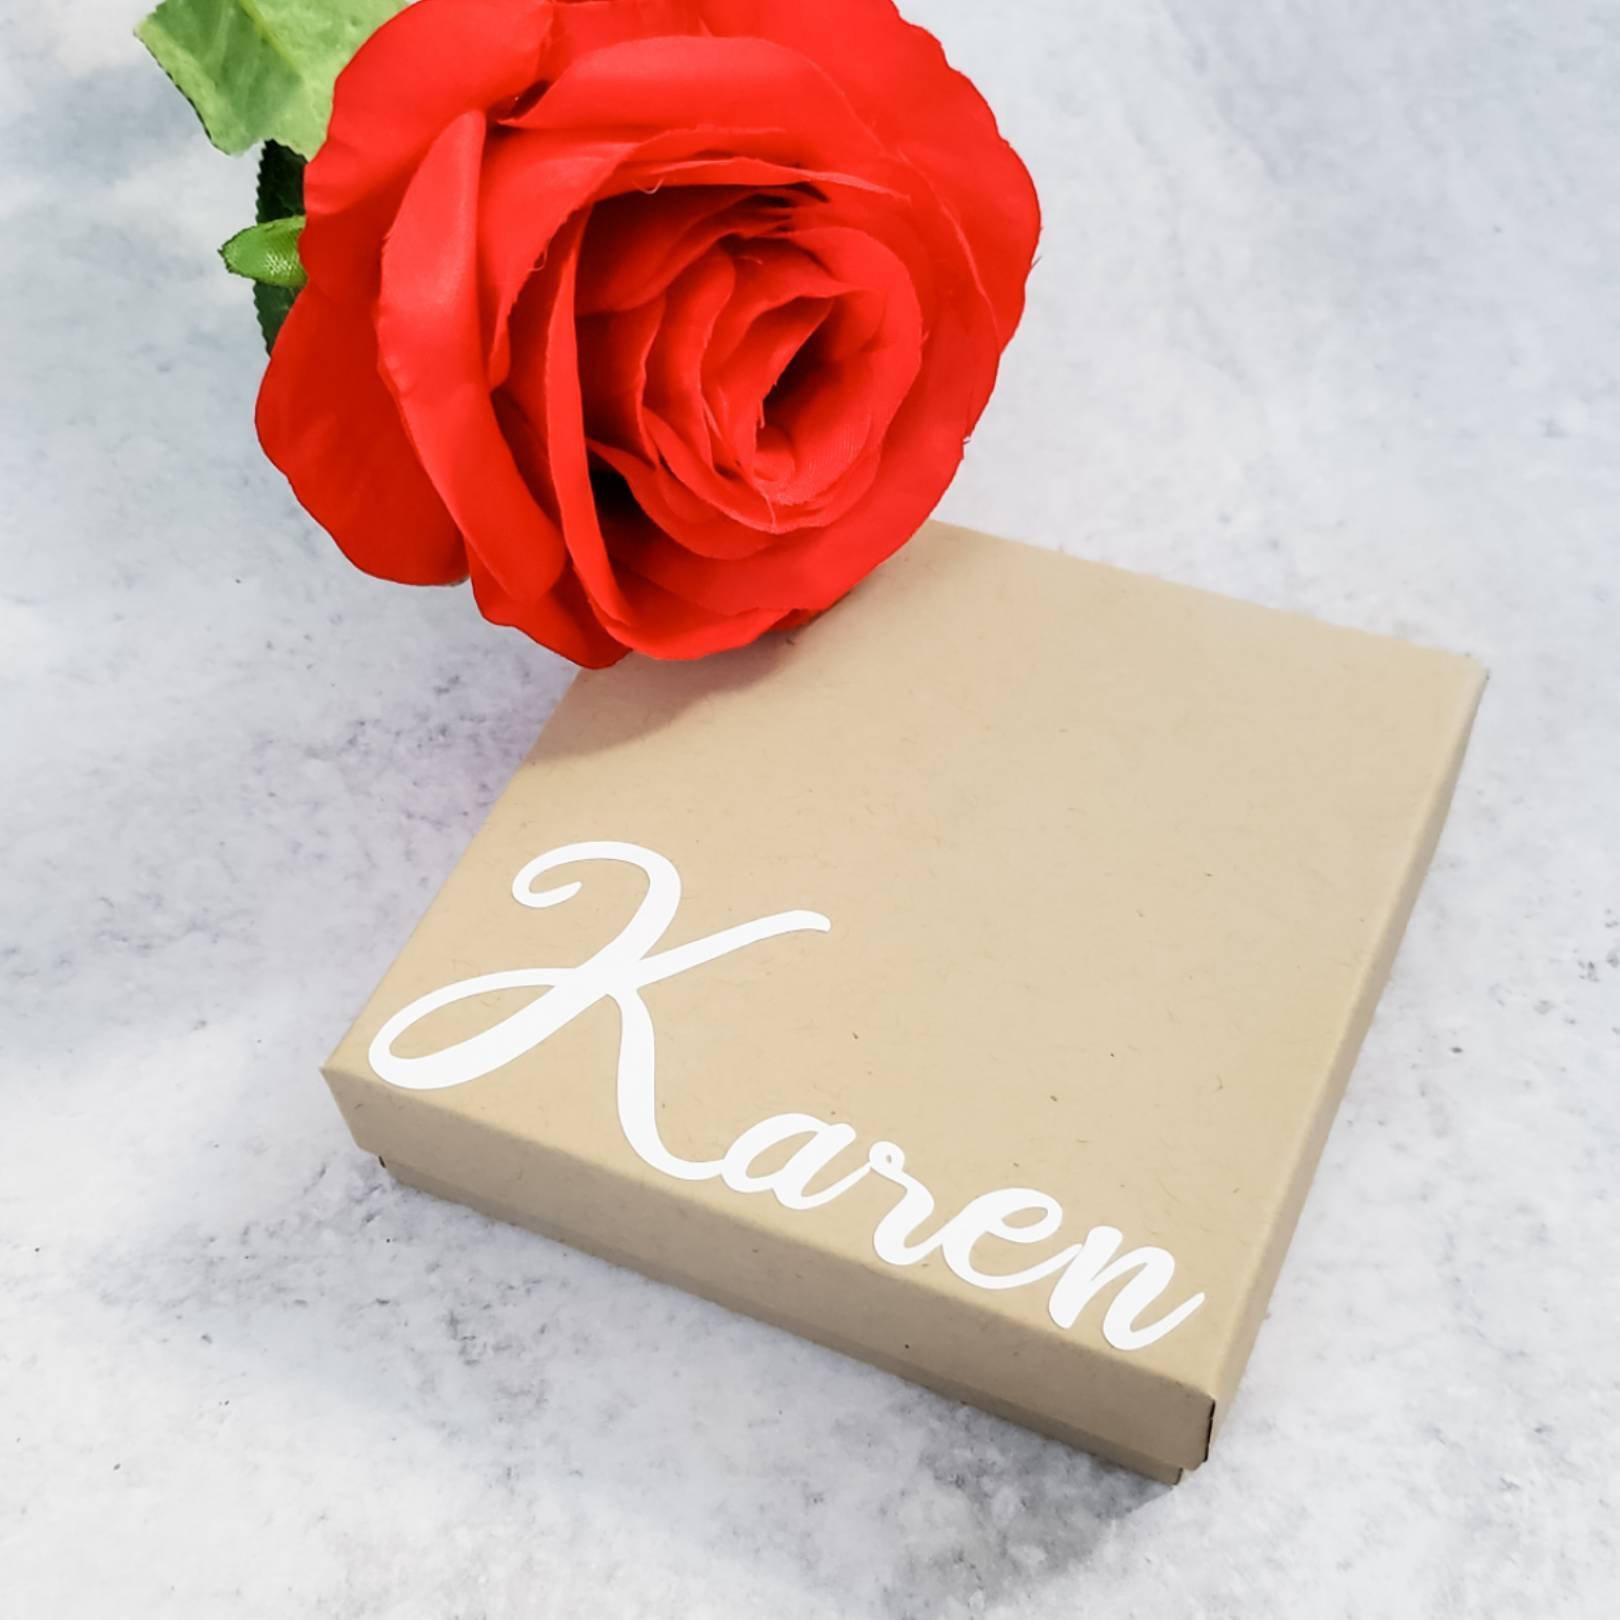 Personalized Jewelry Gift Box Add On Salt and Sparkle